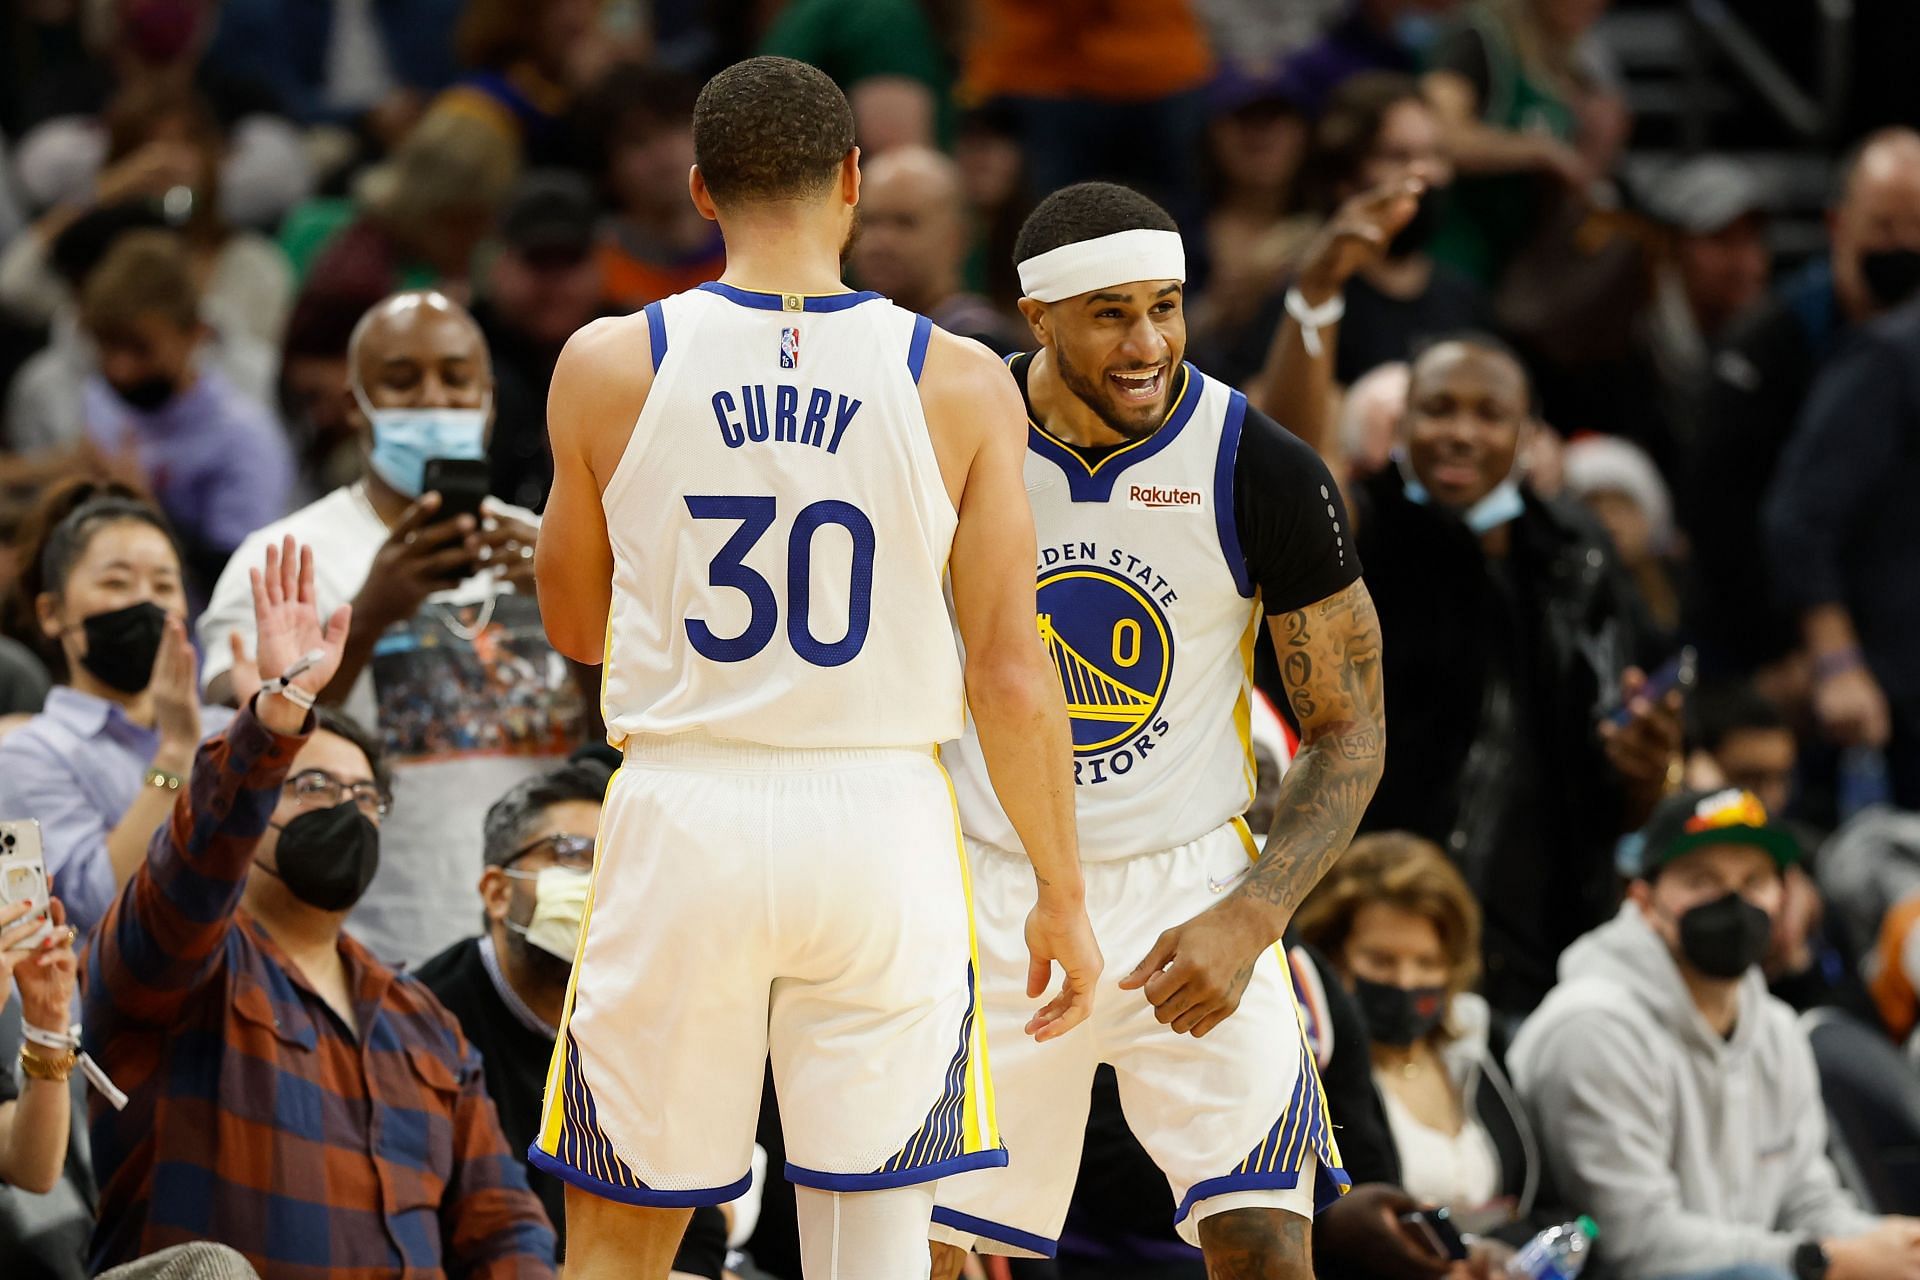 Gary Payton II of the Golden State Warriors celebrates with Steph Curry.